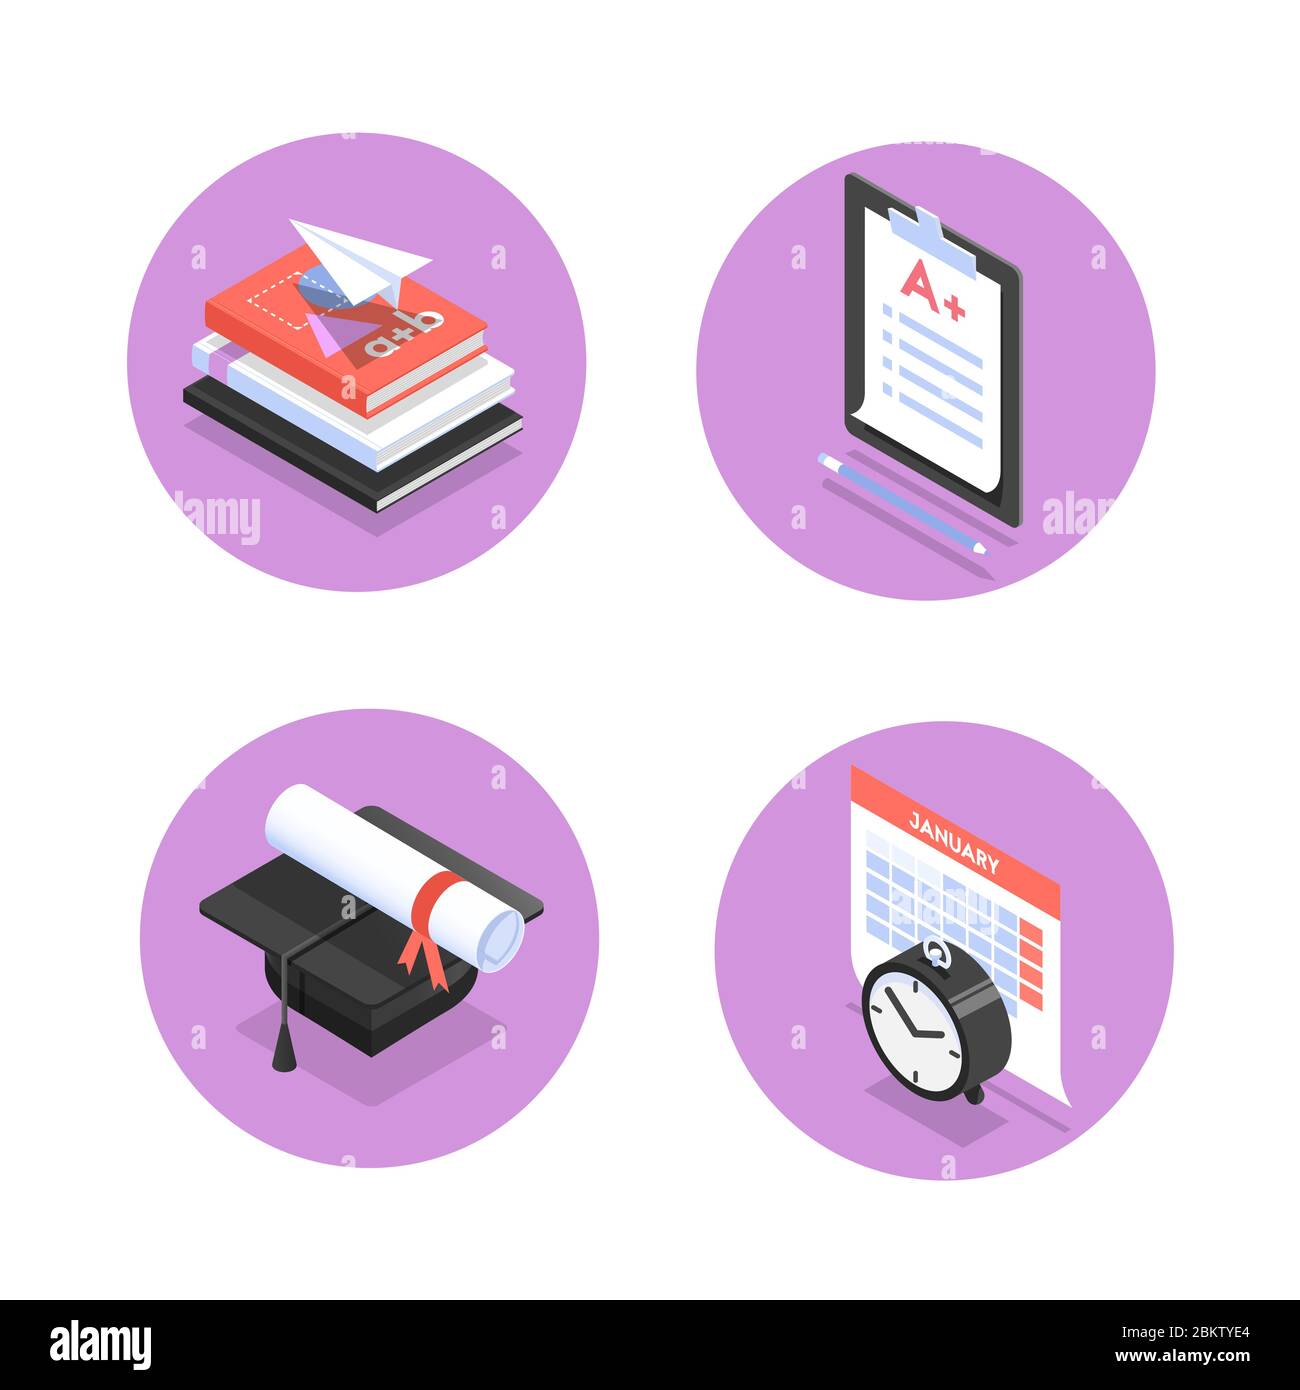 Isometric icons for education theme. Stock Vector